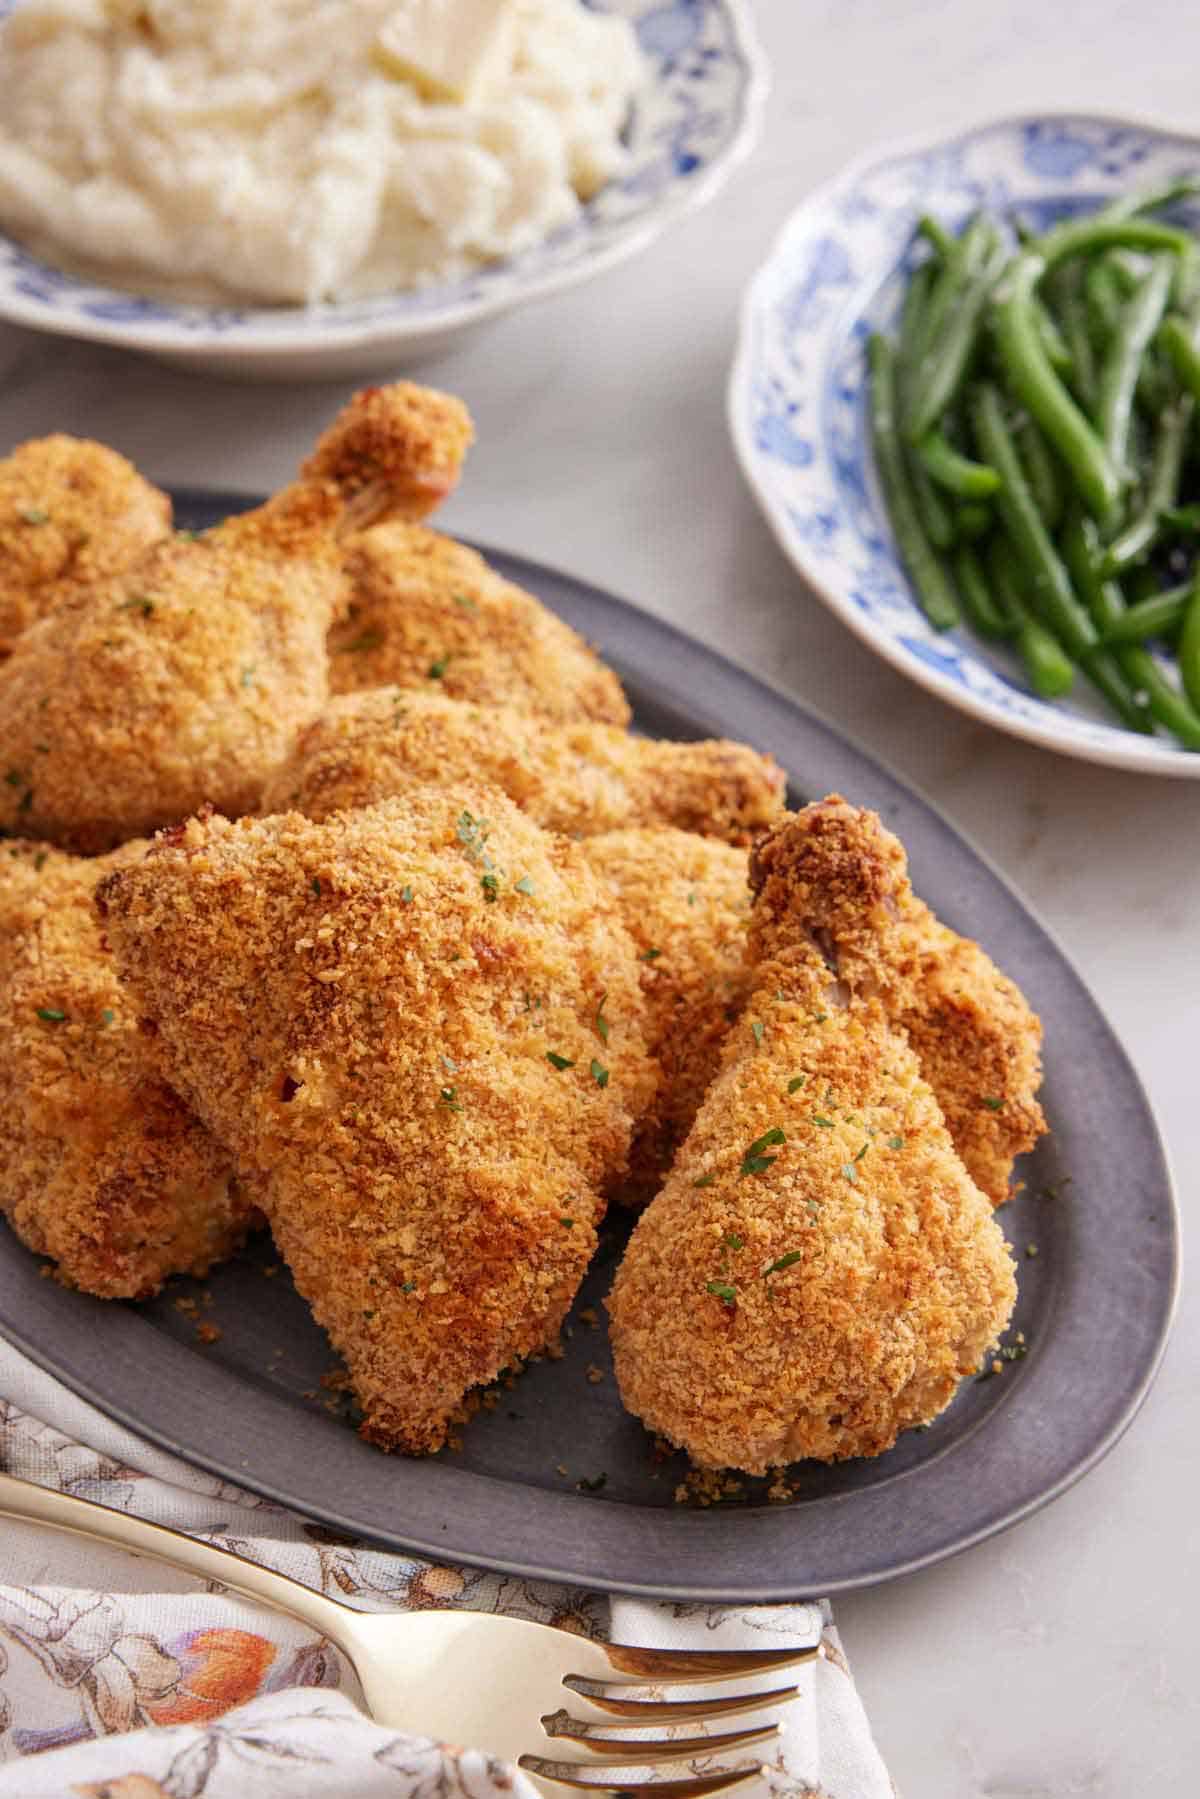 A platter of oven fried chicken with plates of green beans and mashed potatoes in the background.